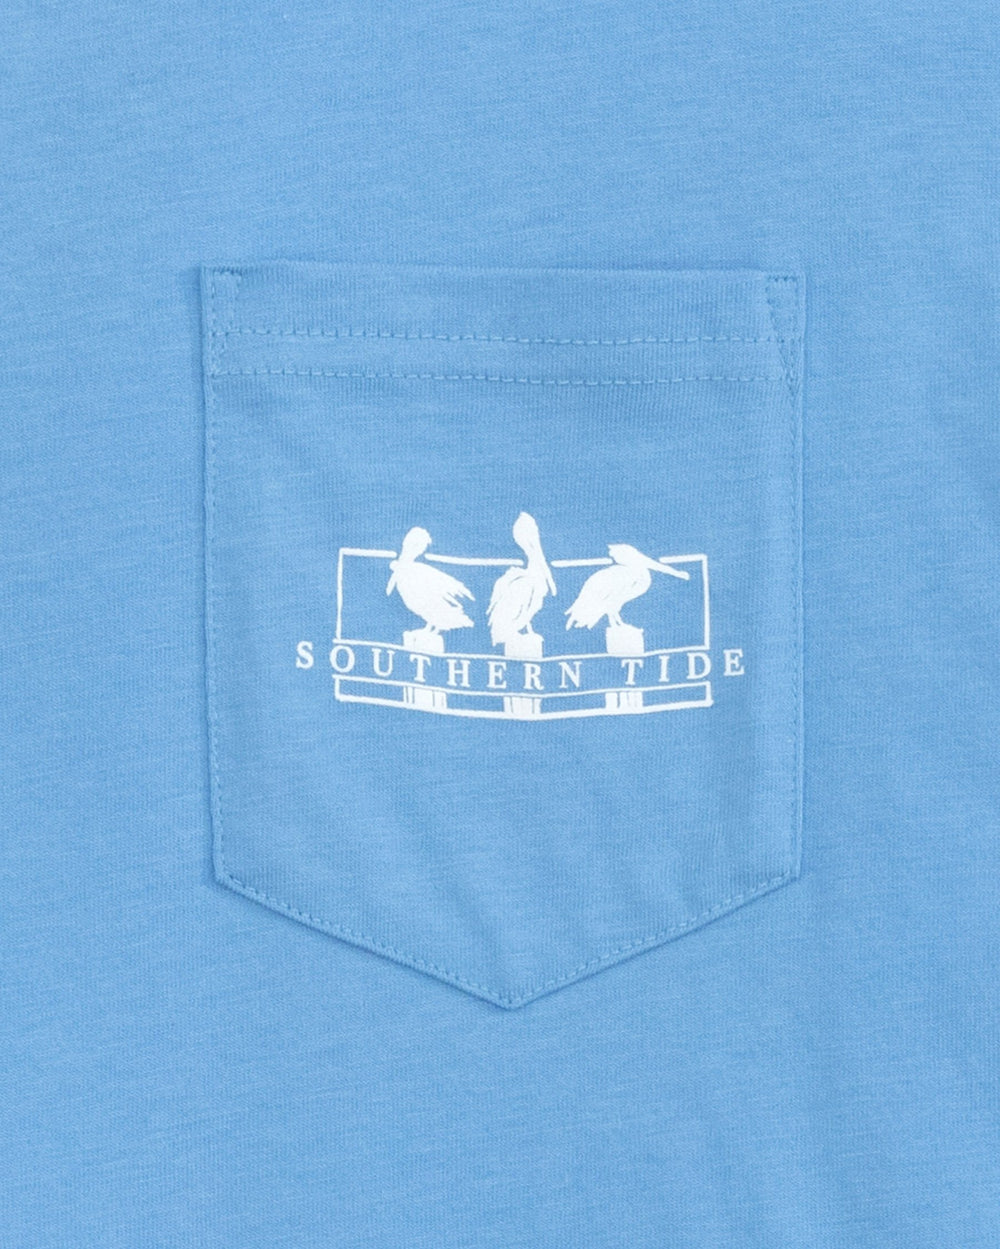 The pocket view of the Pelican Sunset Long Sleeve T-Shirt by Southern Tide - Ocean Channel